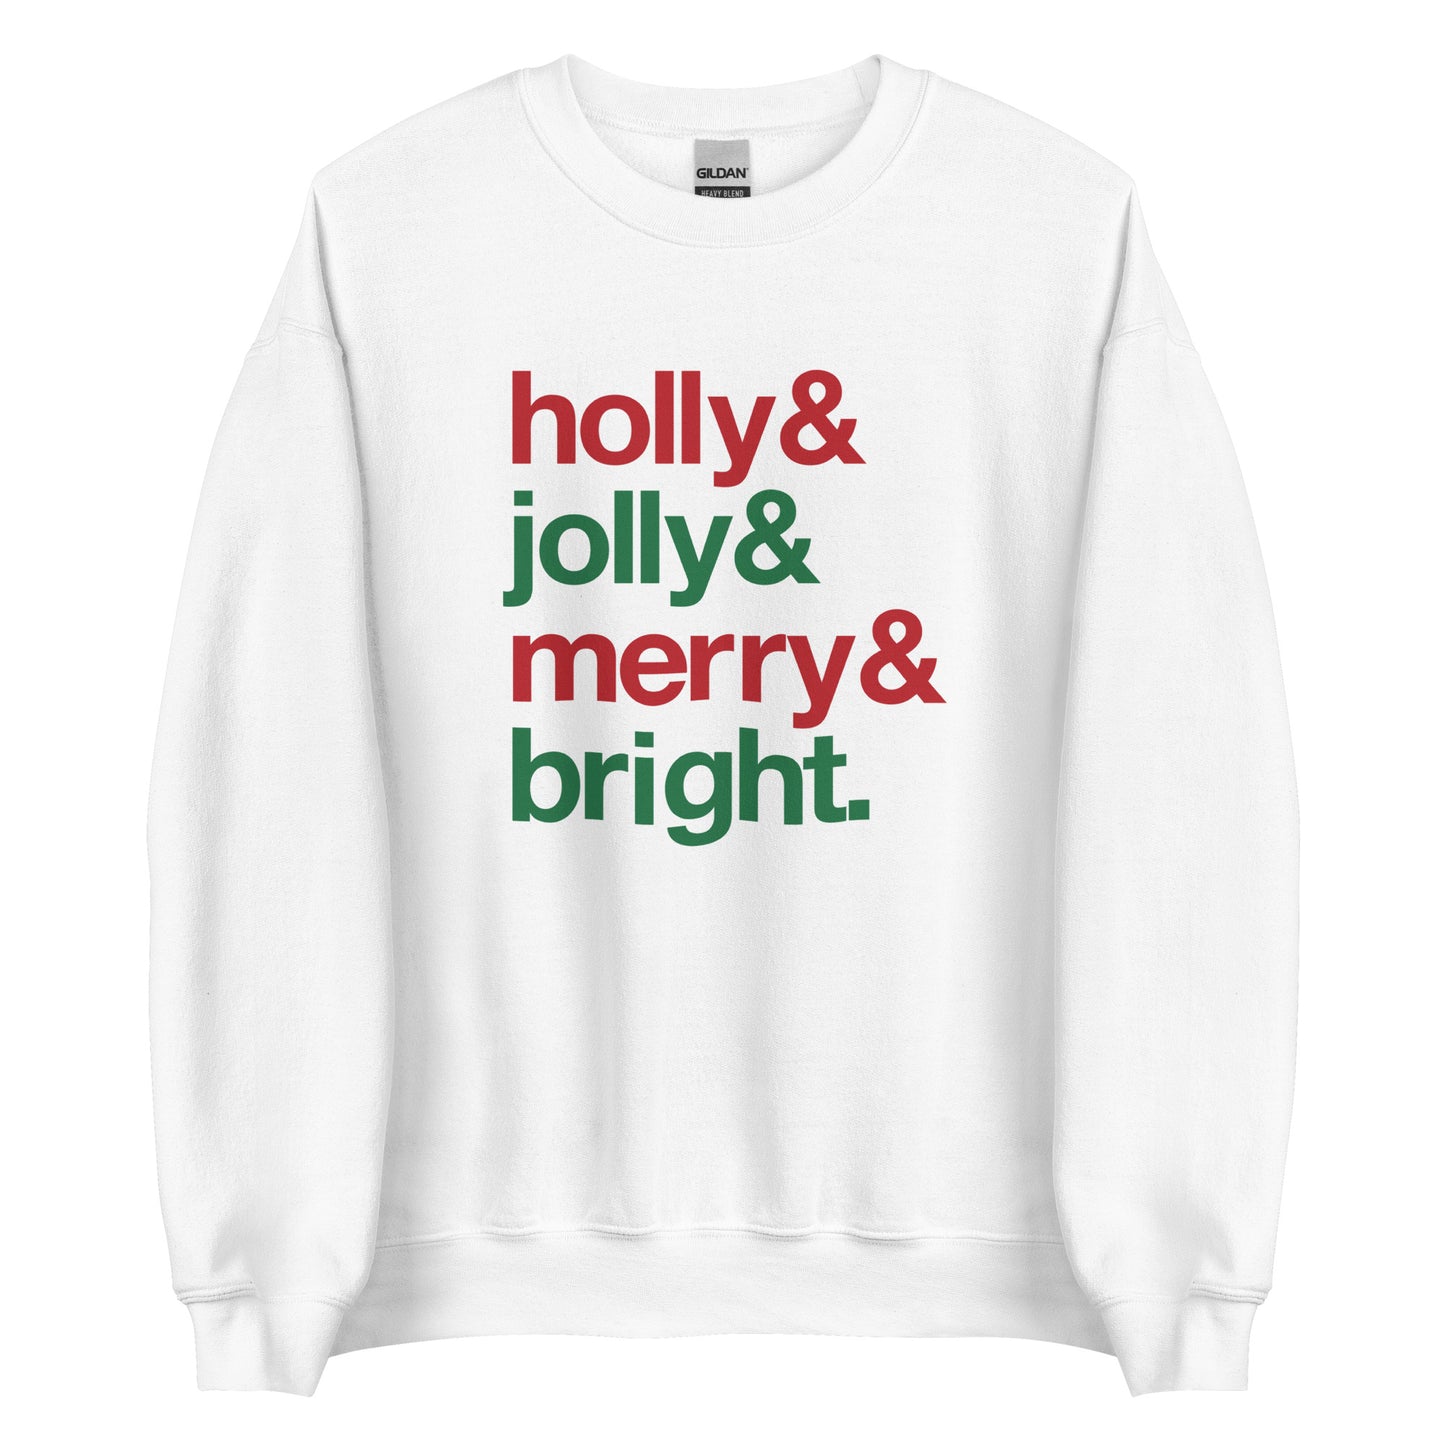 A white crewneck sweatshirt featuring four lines of red & green text that read "Holly & jolly & merry & bright"